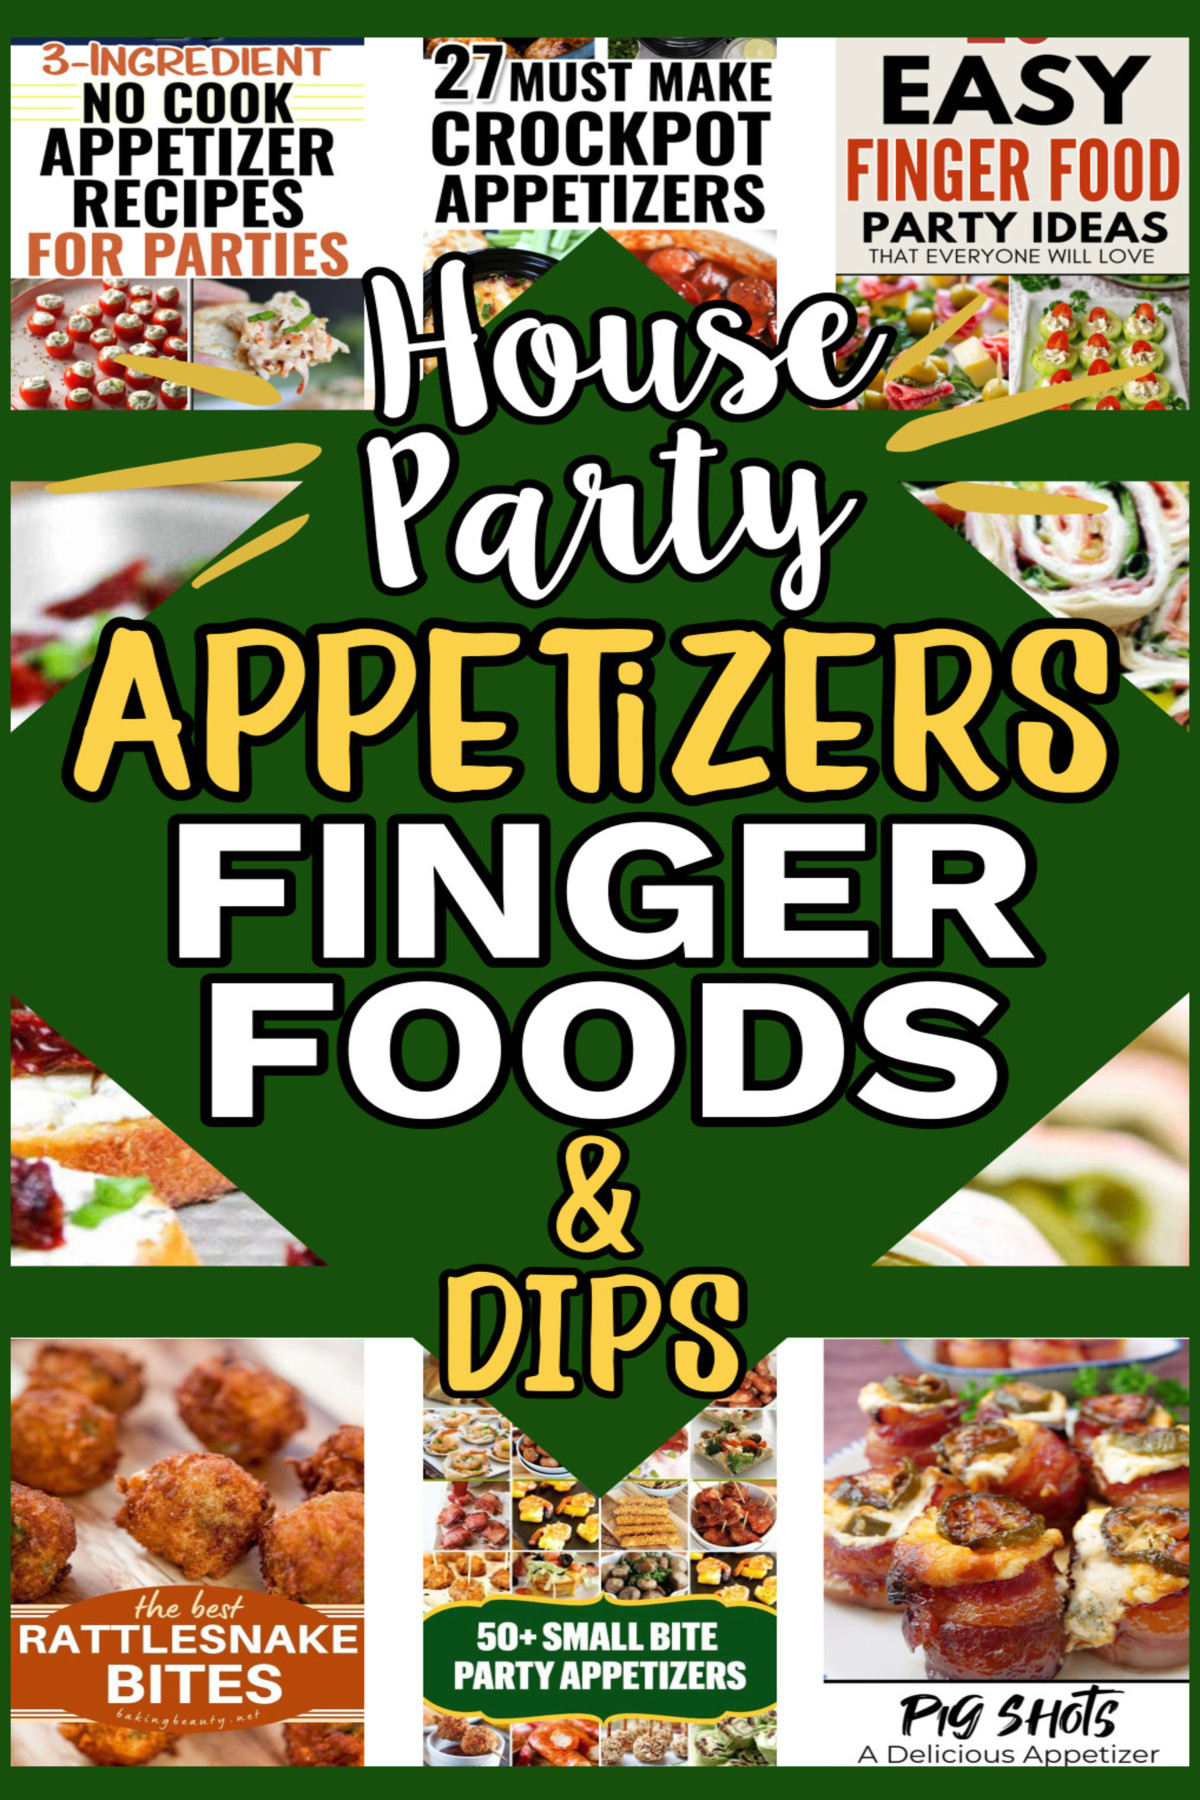 House Party Food ideas Appetizers Finger Foods and Dips